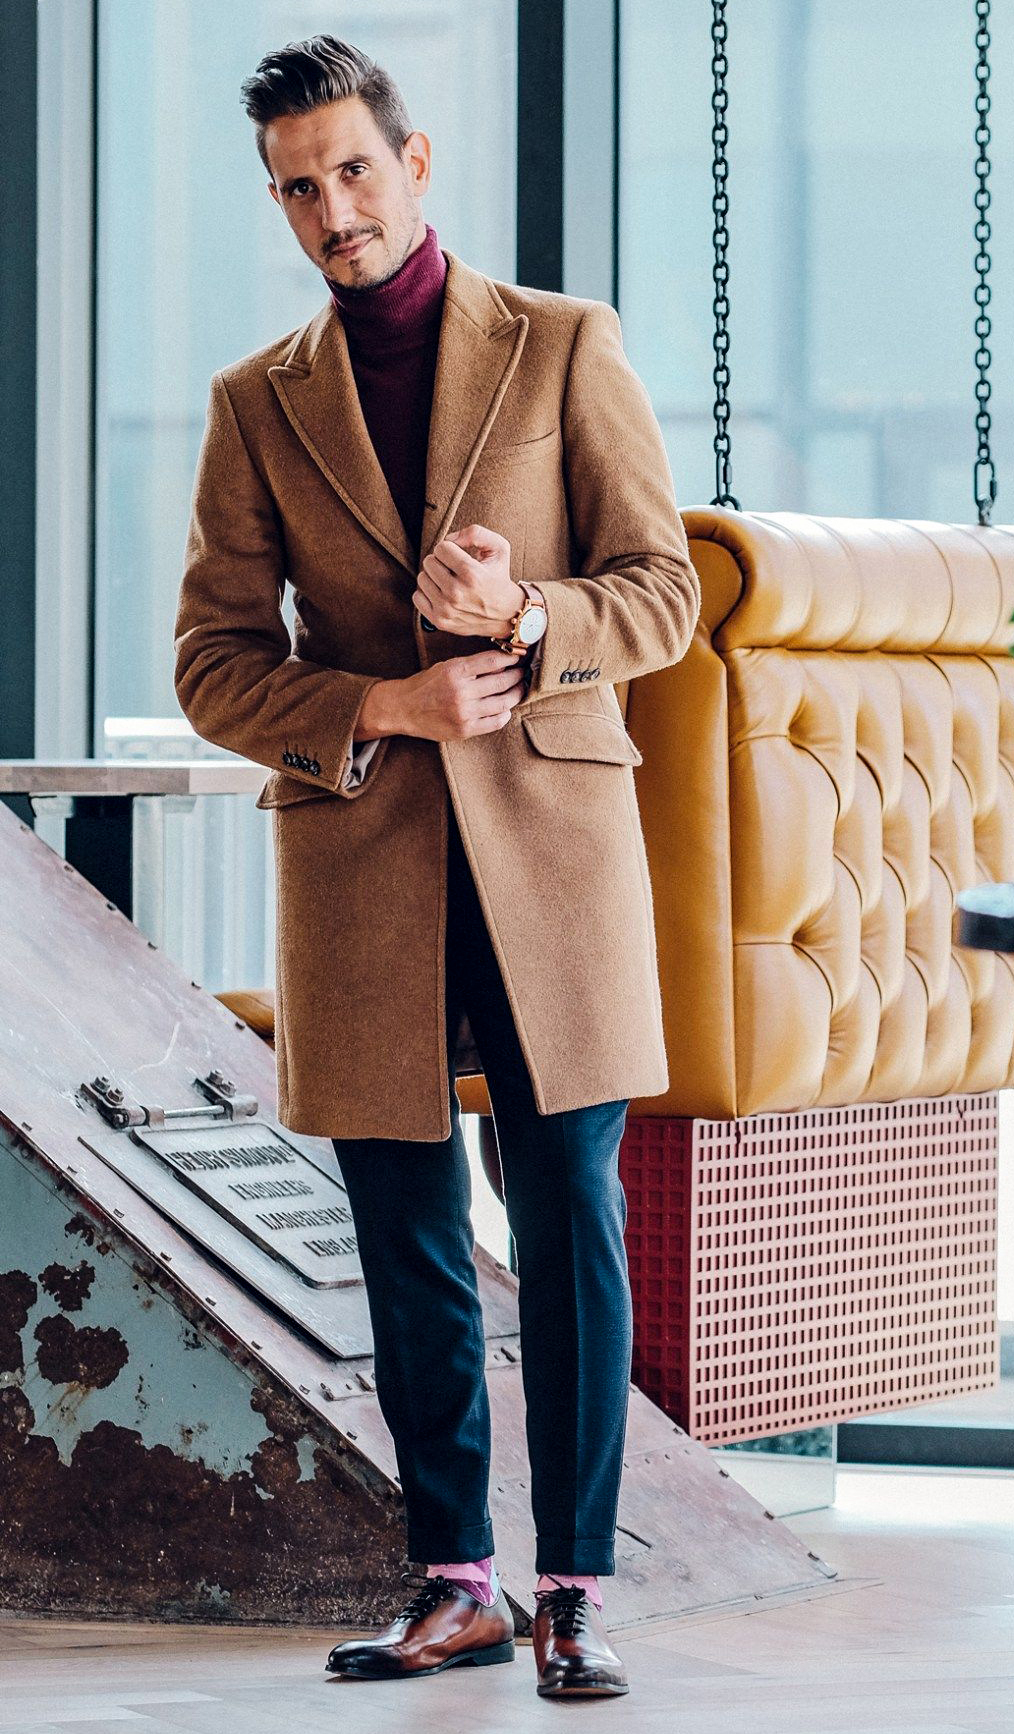 Burgundy turtleneck, camel overcoat, navy blue pants, and brown leather oxford shoes outfit